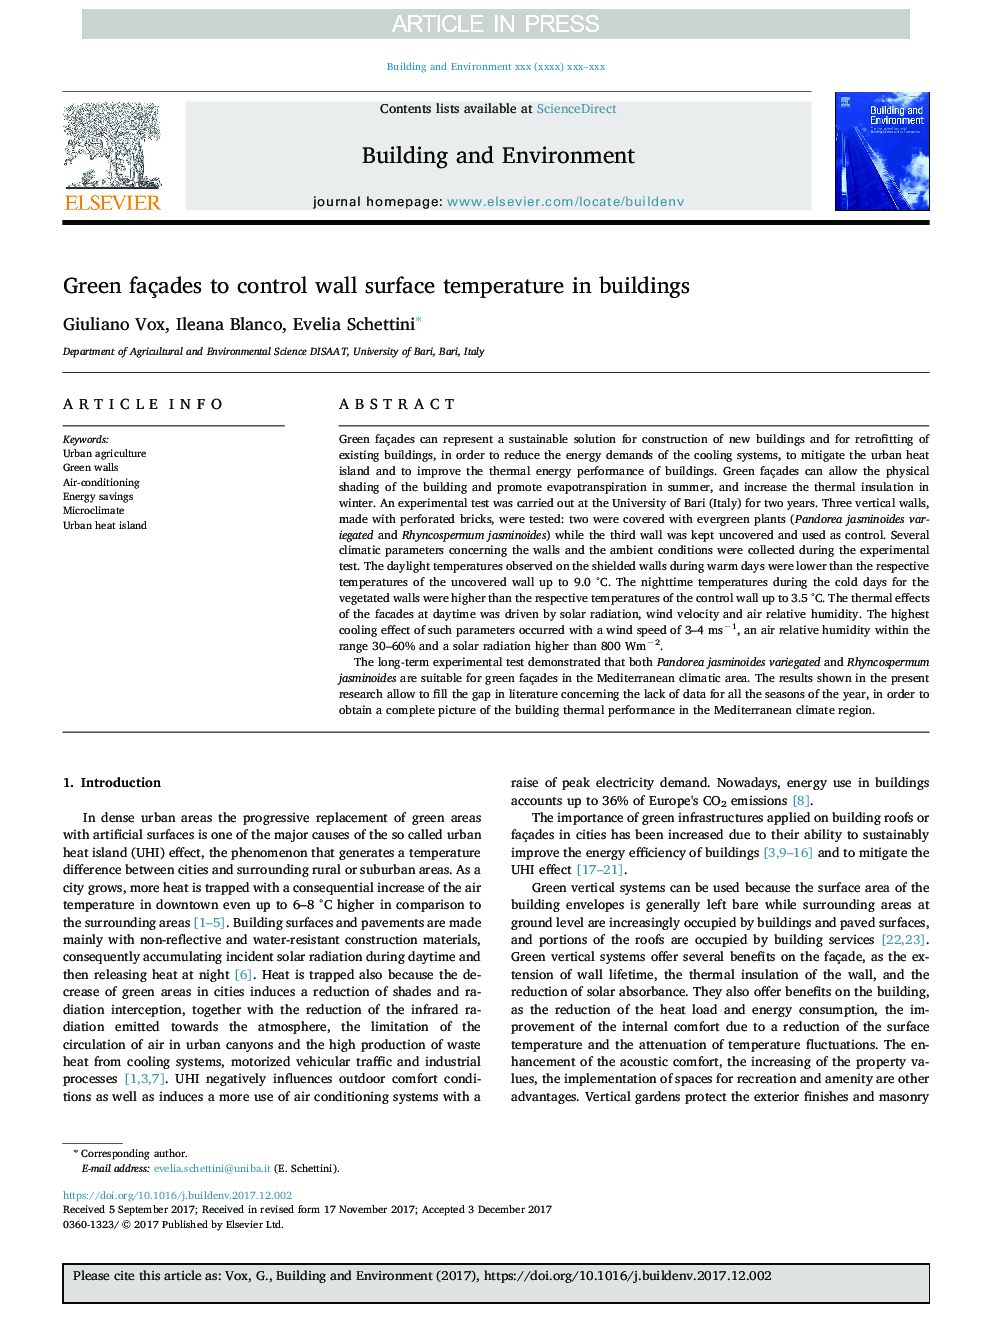 Green façades to control wall surface temperature in buildings